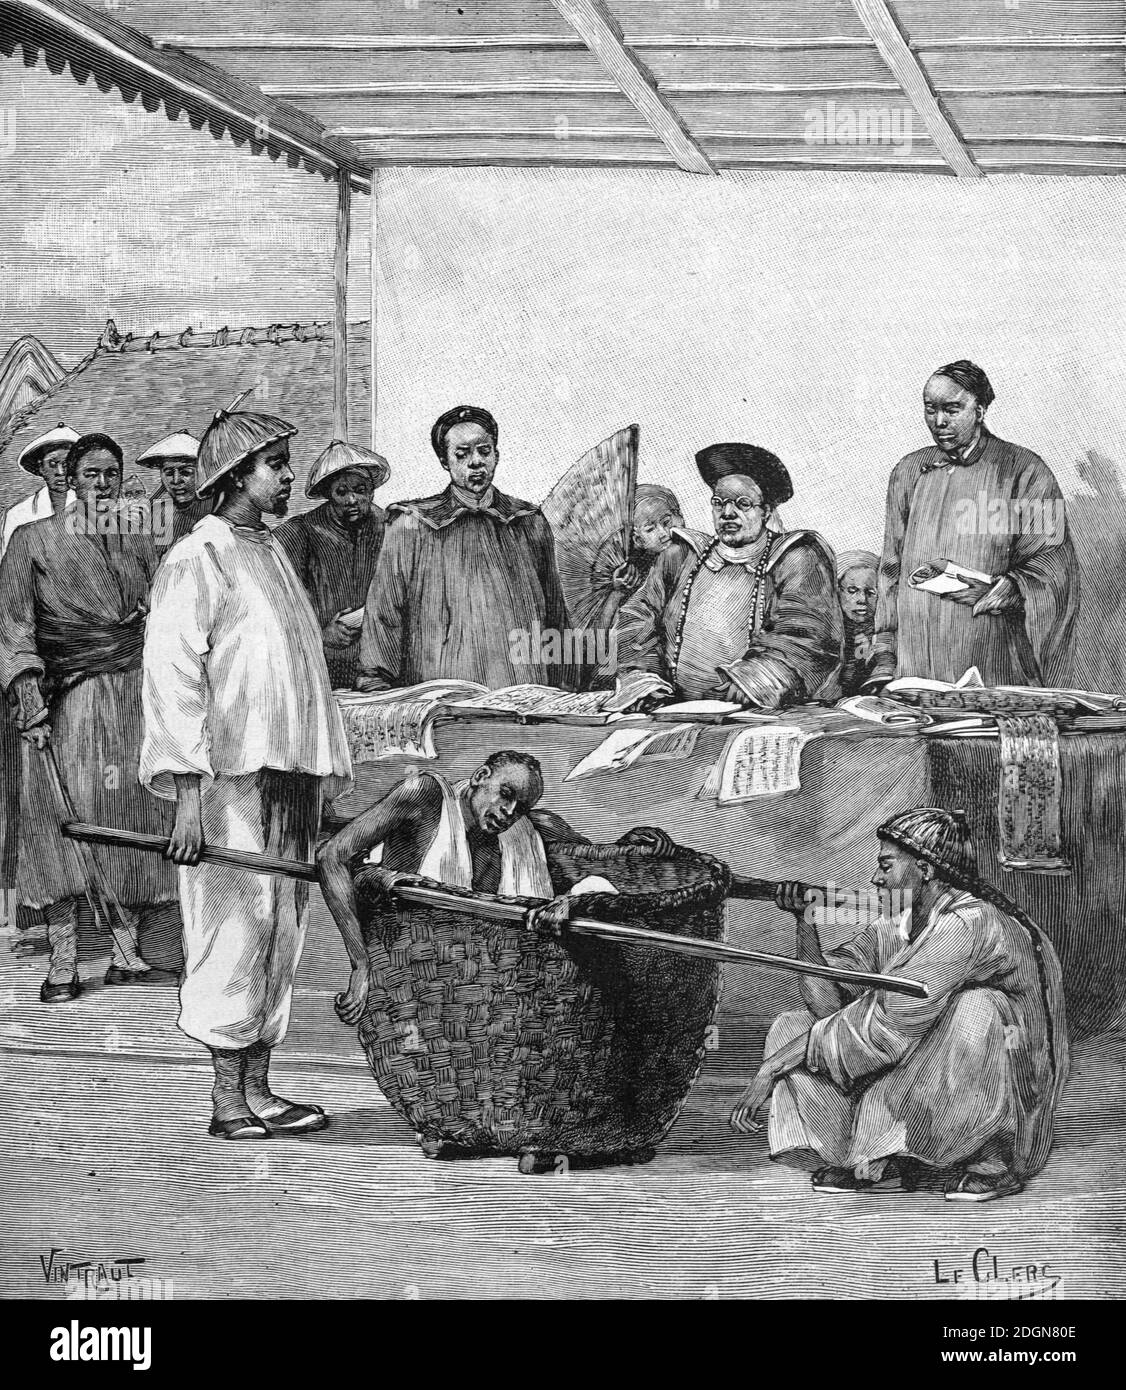 Prisoner in Bucket in Front of Law Court Judge Canton or Guangzhou China (Engr 1895 Vintraut-LeClerc) Vintage Illustration or Engraving Stock Photo